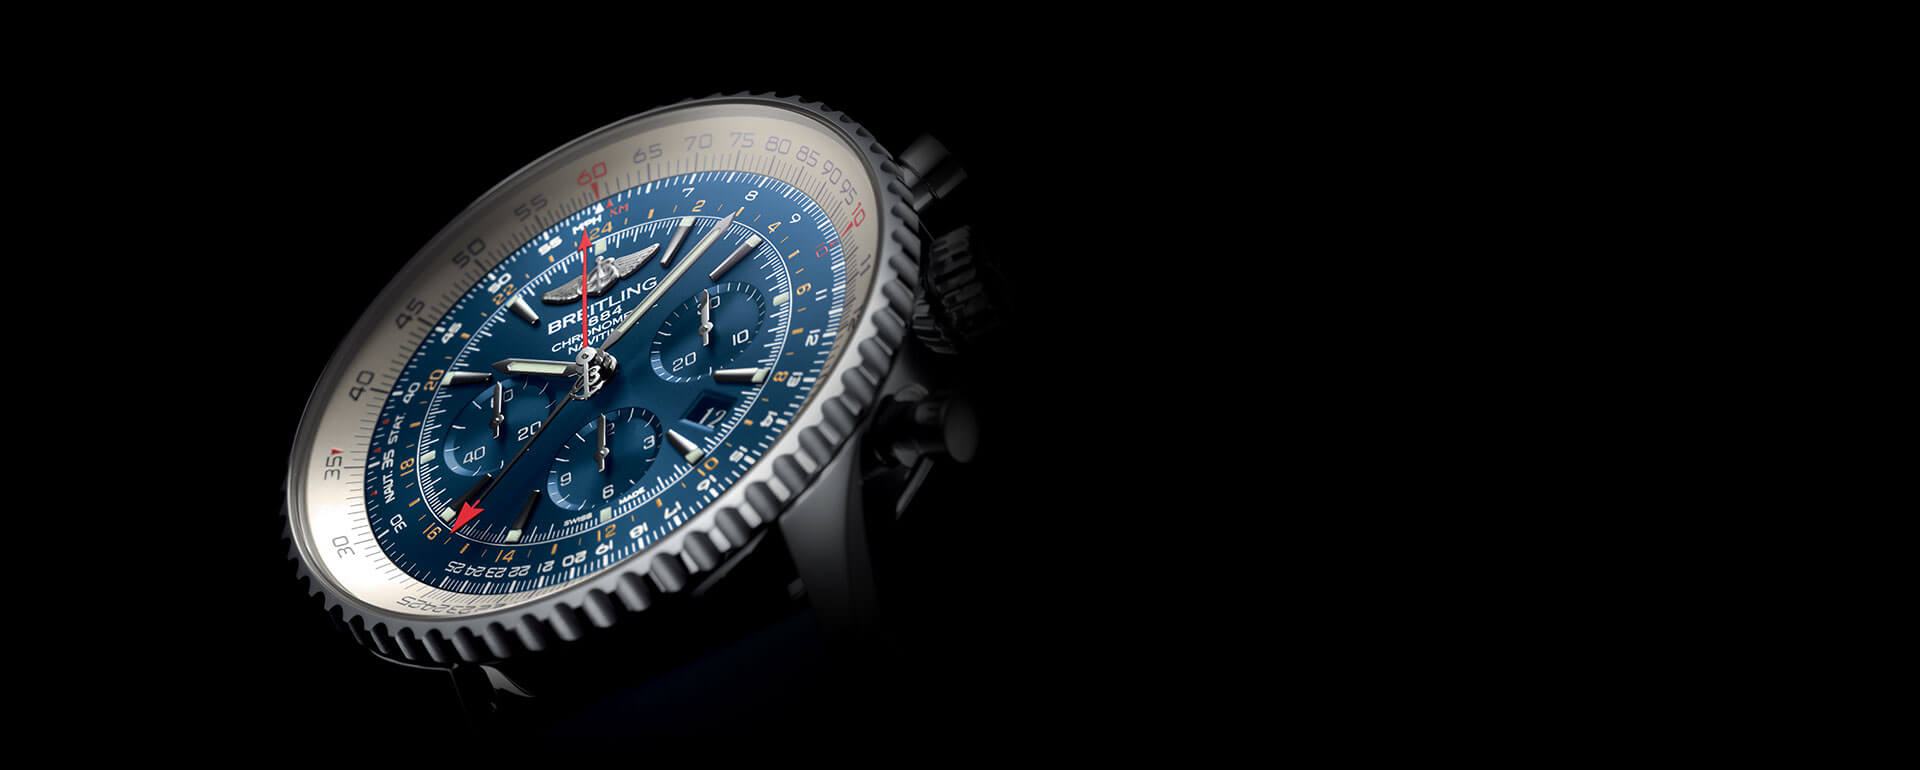 breitling Top Time 1765 